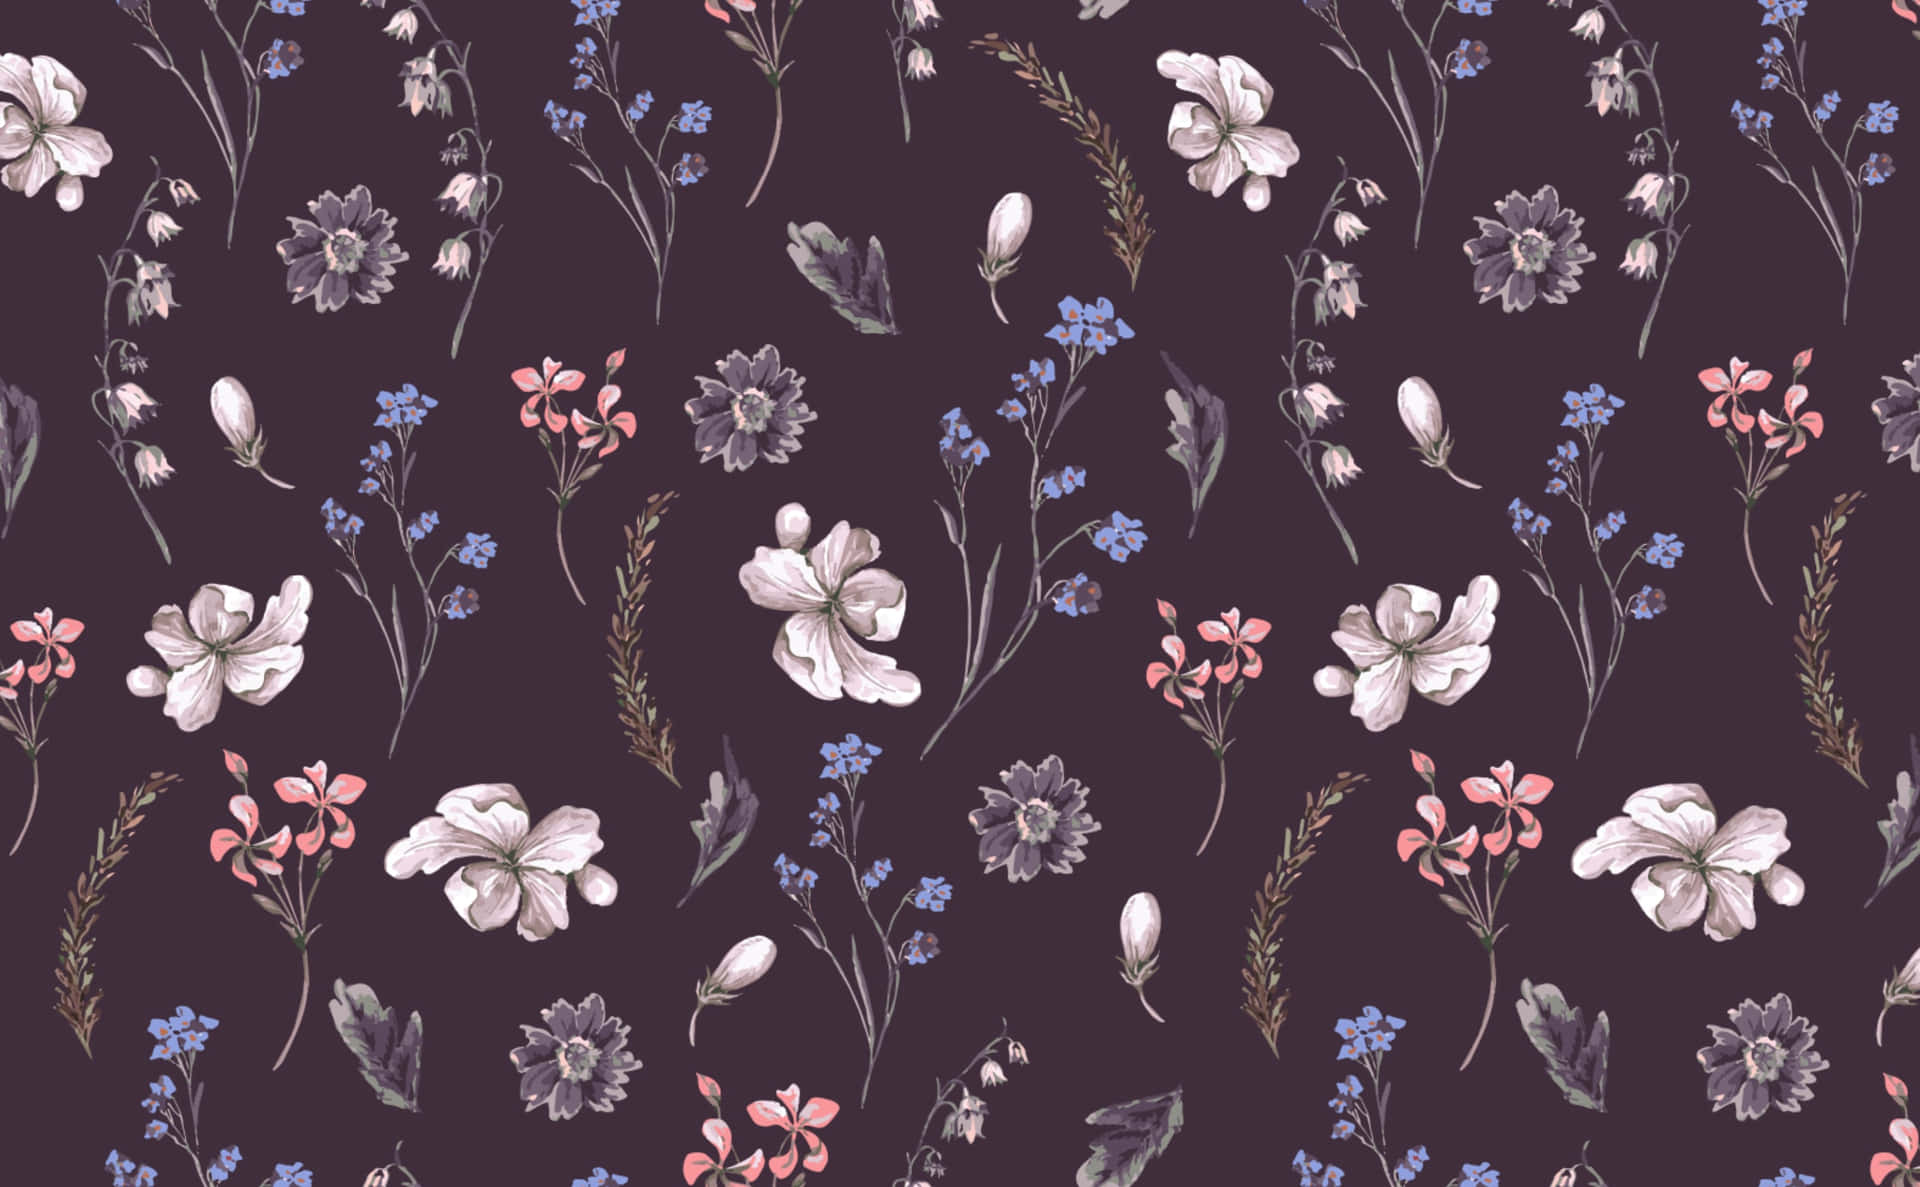 A vibrant floral pattern with an array of bold colors